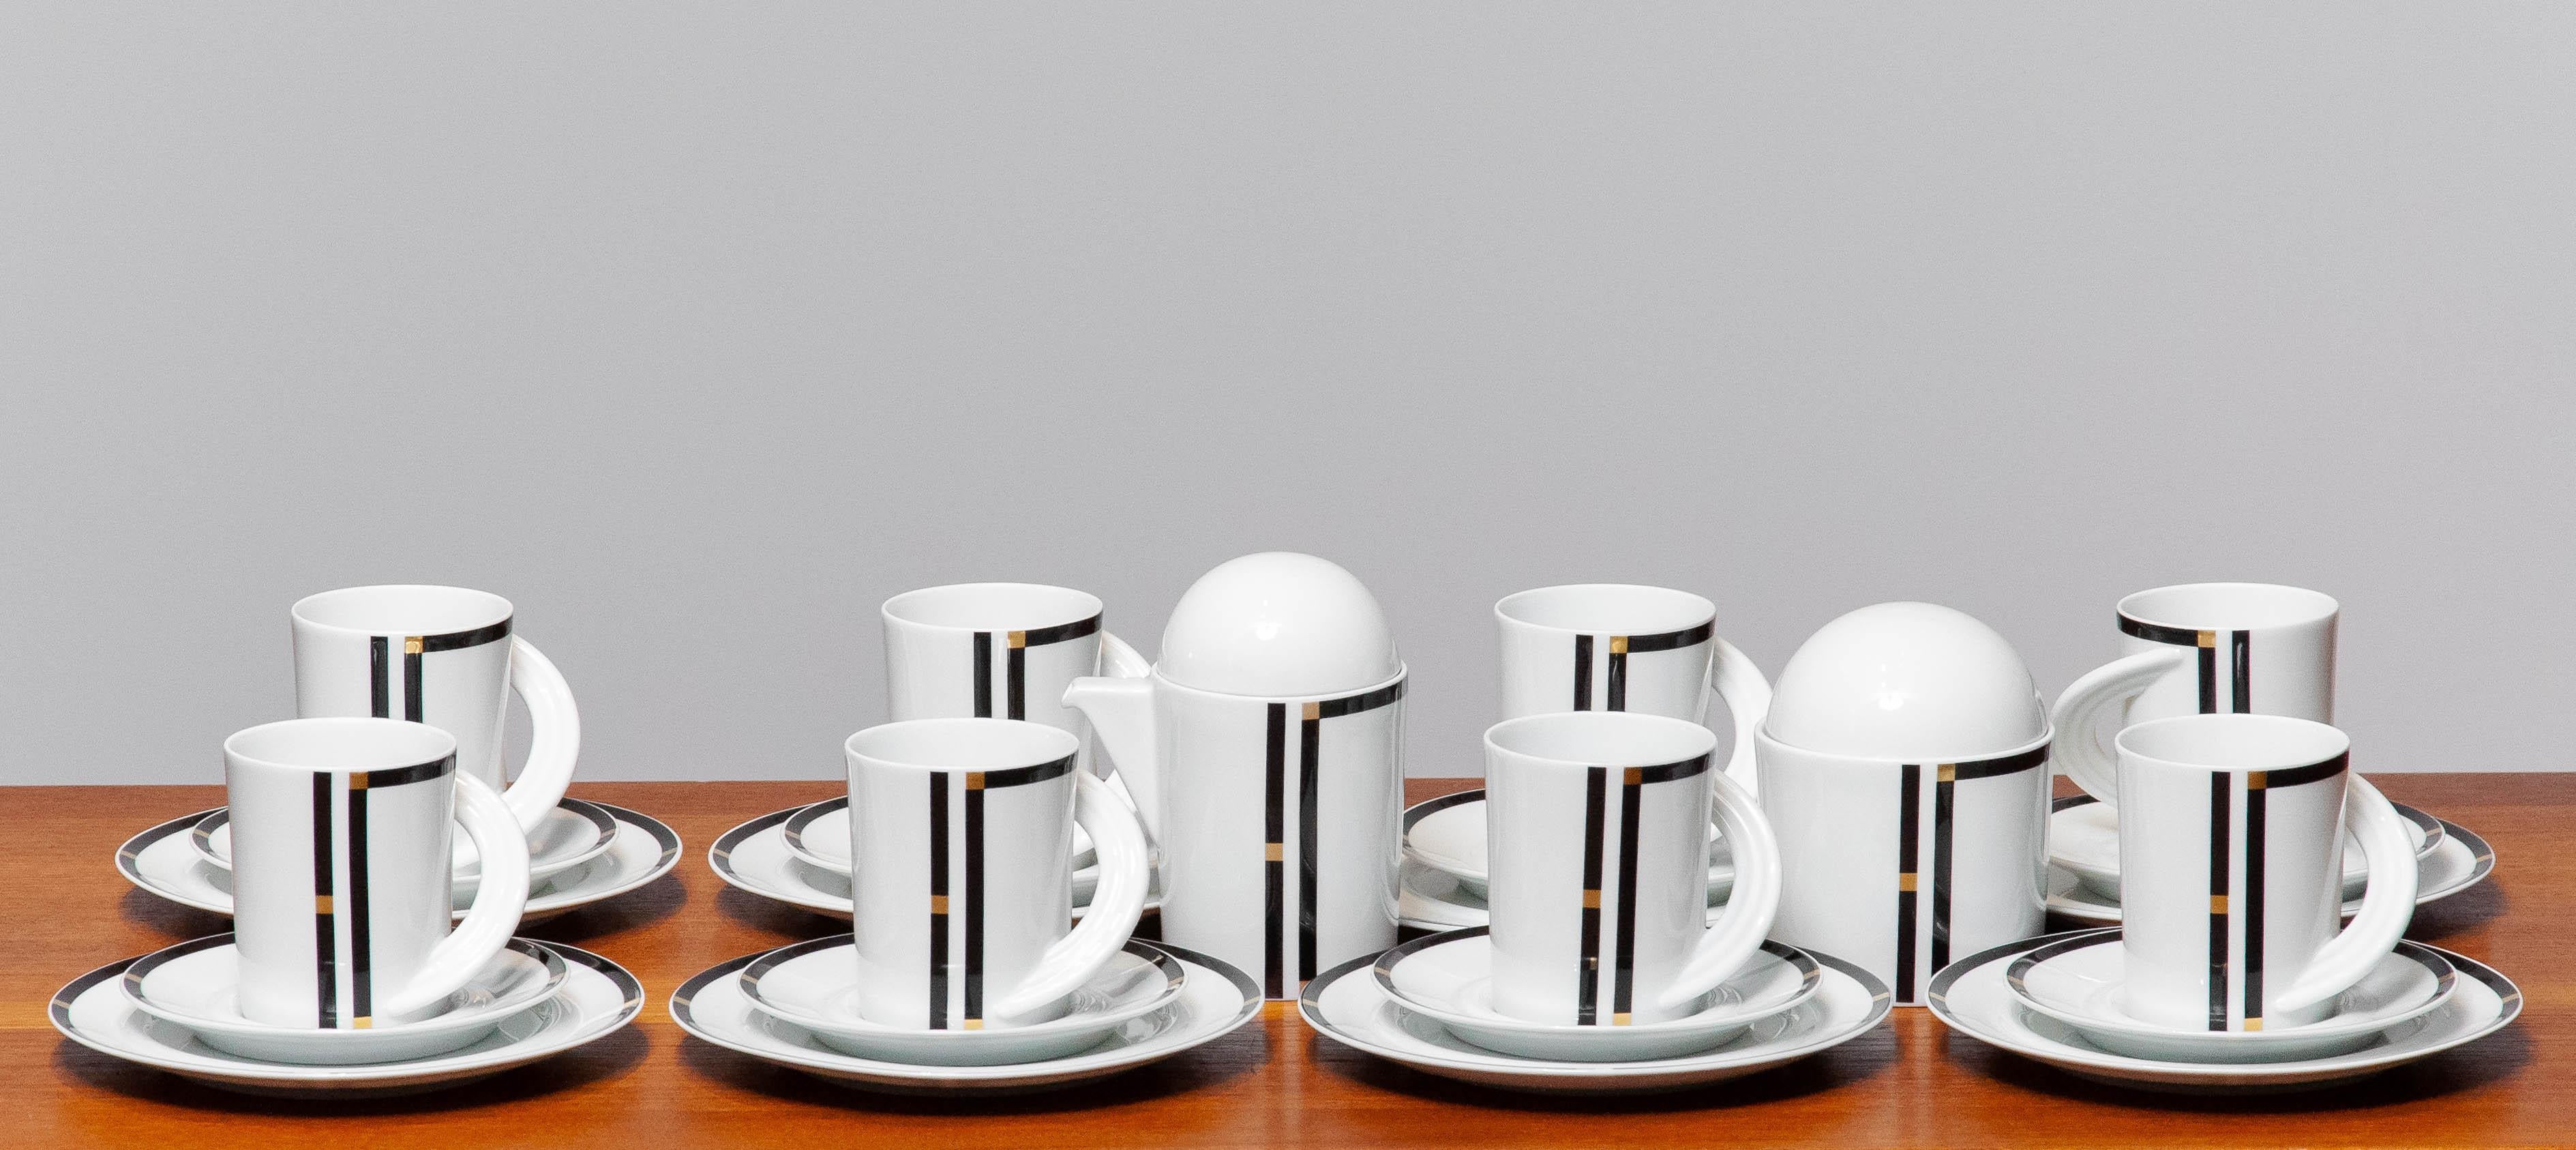 Absolutely beautiful porcelain tea / coffee set from the series 'Studio Linie' by Rosenthal Germany designed by Mario Bellini.
This tea / coffee set is made for eight persons and is named 'Cupola Nera'.
Art Deco style.
The complete set is in